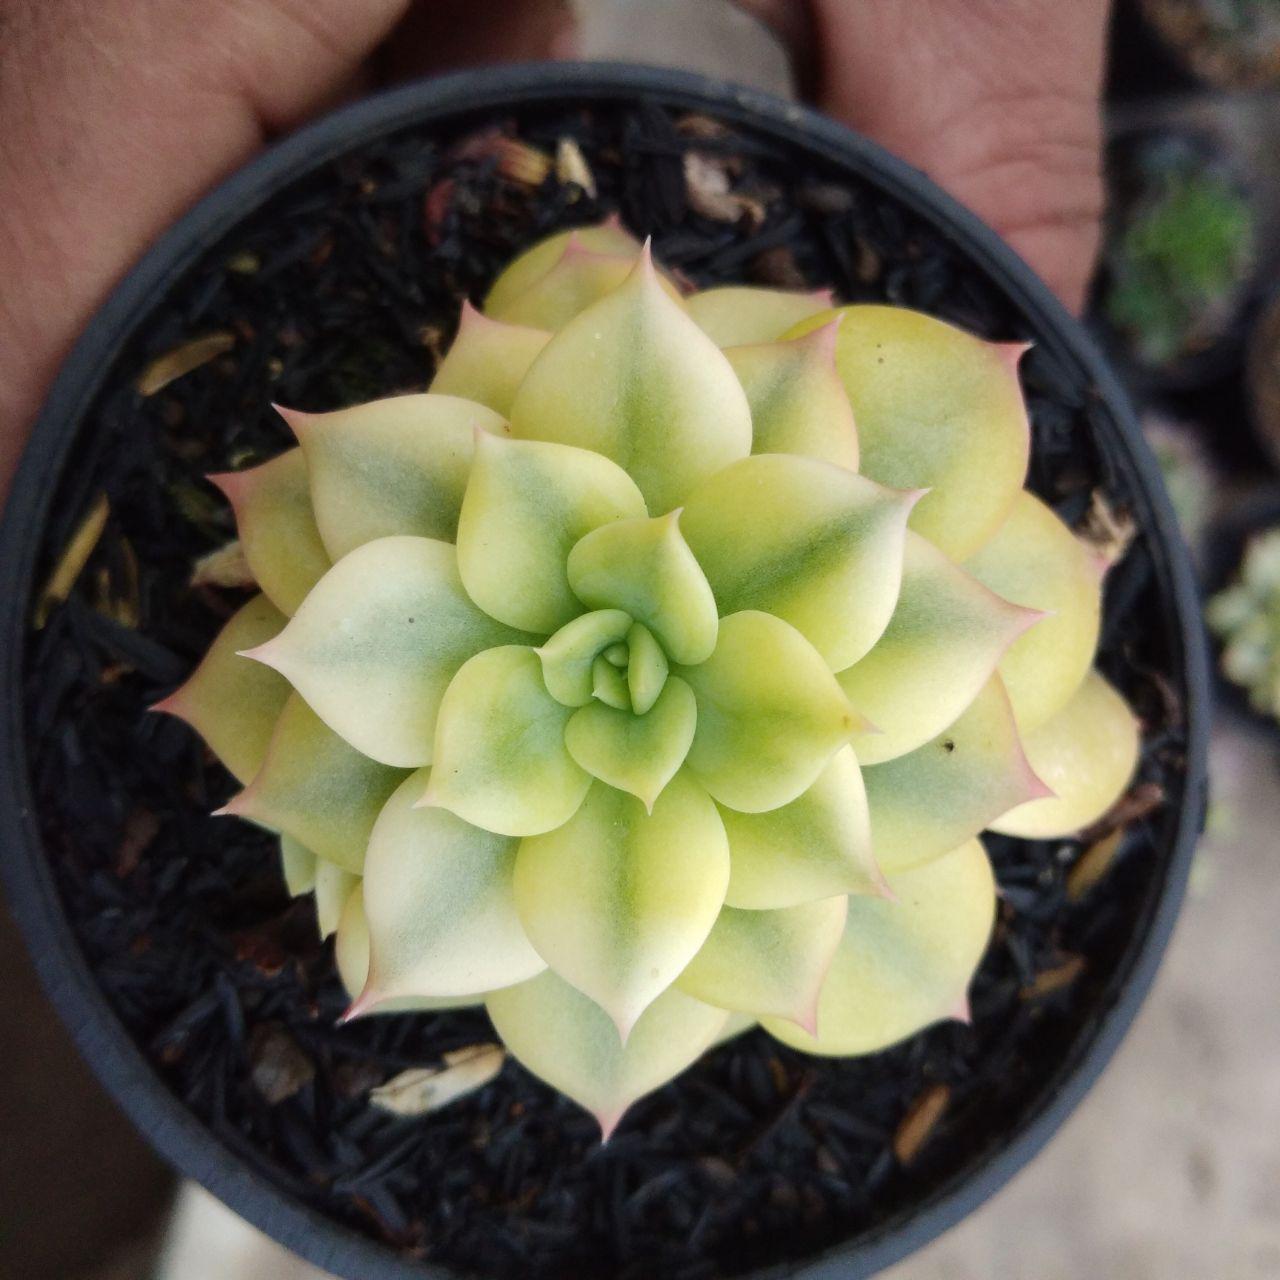 Echeveria Black Prince Afra Variegated. Interest to buy succulents from Indonesia? kaktus.id online store selling many succulents varieties from Indonesia, start price from USD 1. We have rare collection item e.g black prince variegated, crested, variegated succulents, mutation succulents, euphorbia, caudex plants and many others. All the orders will process professional by experienced team. Just place your order directly on this website, all the cost will automatically calculate.